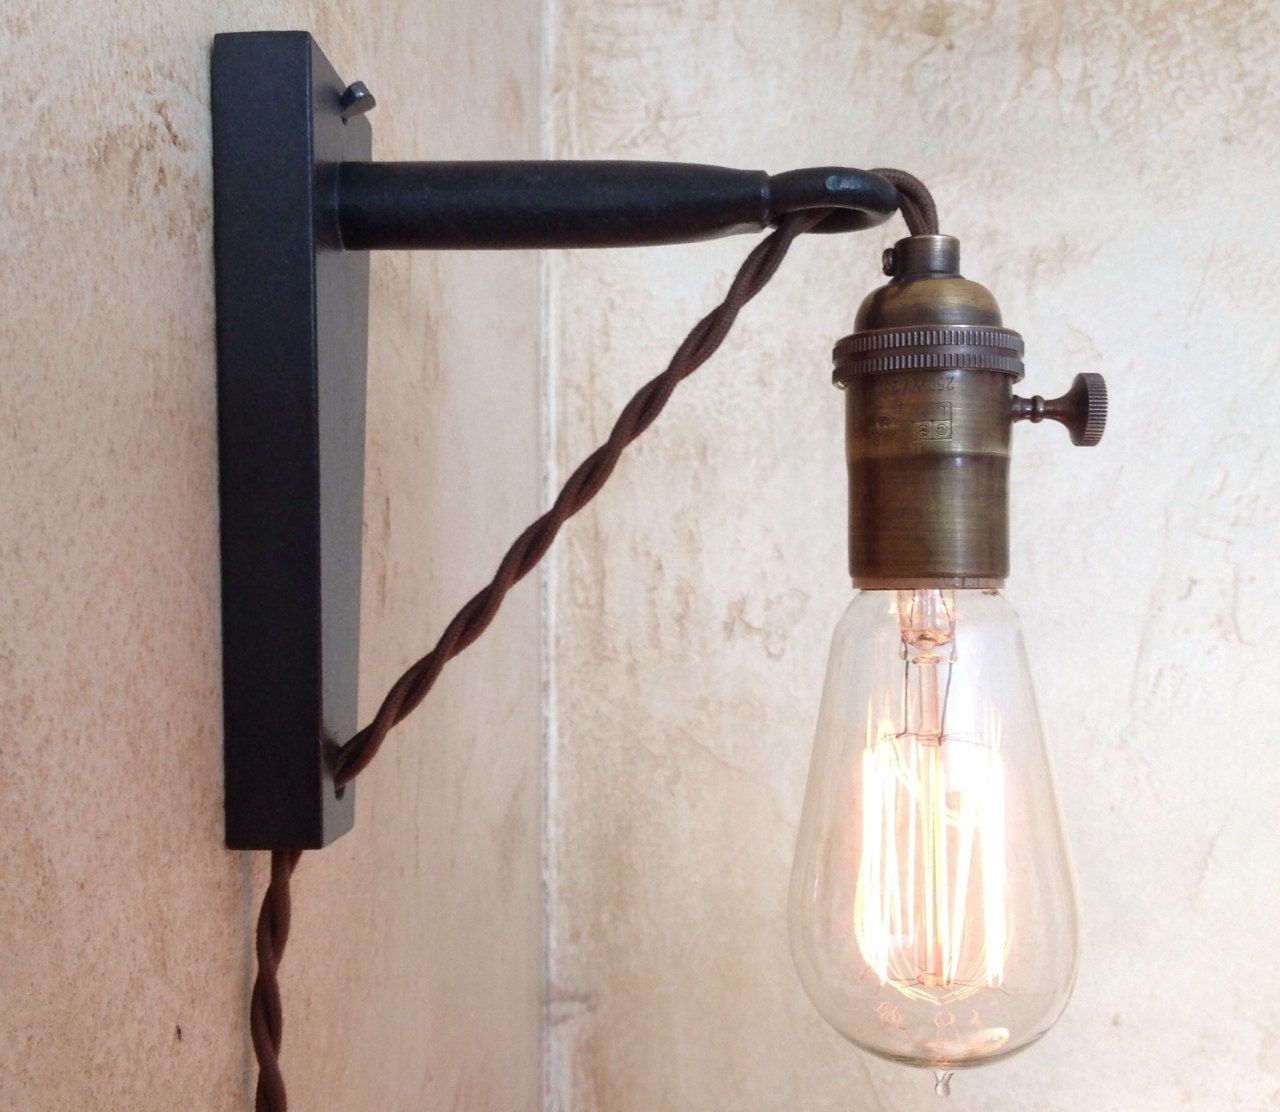 Bathroom Wall Lights With Electrical Outlet | Creative Bathroom Intended For Outdoor Wall Lights With Electrical Outlet (View 8 of 15)